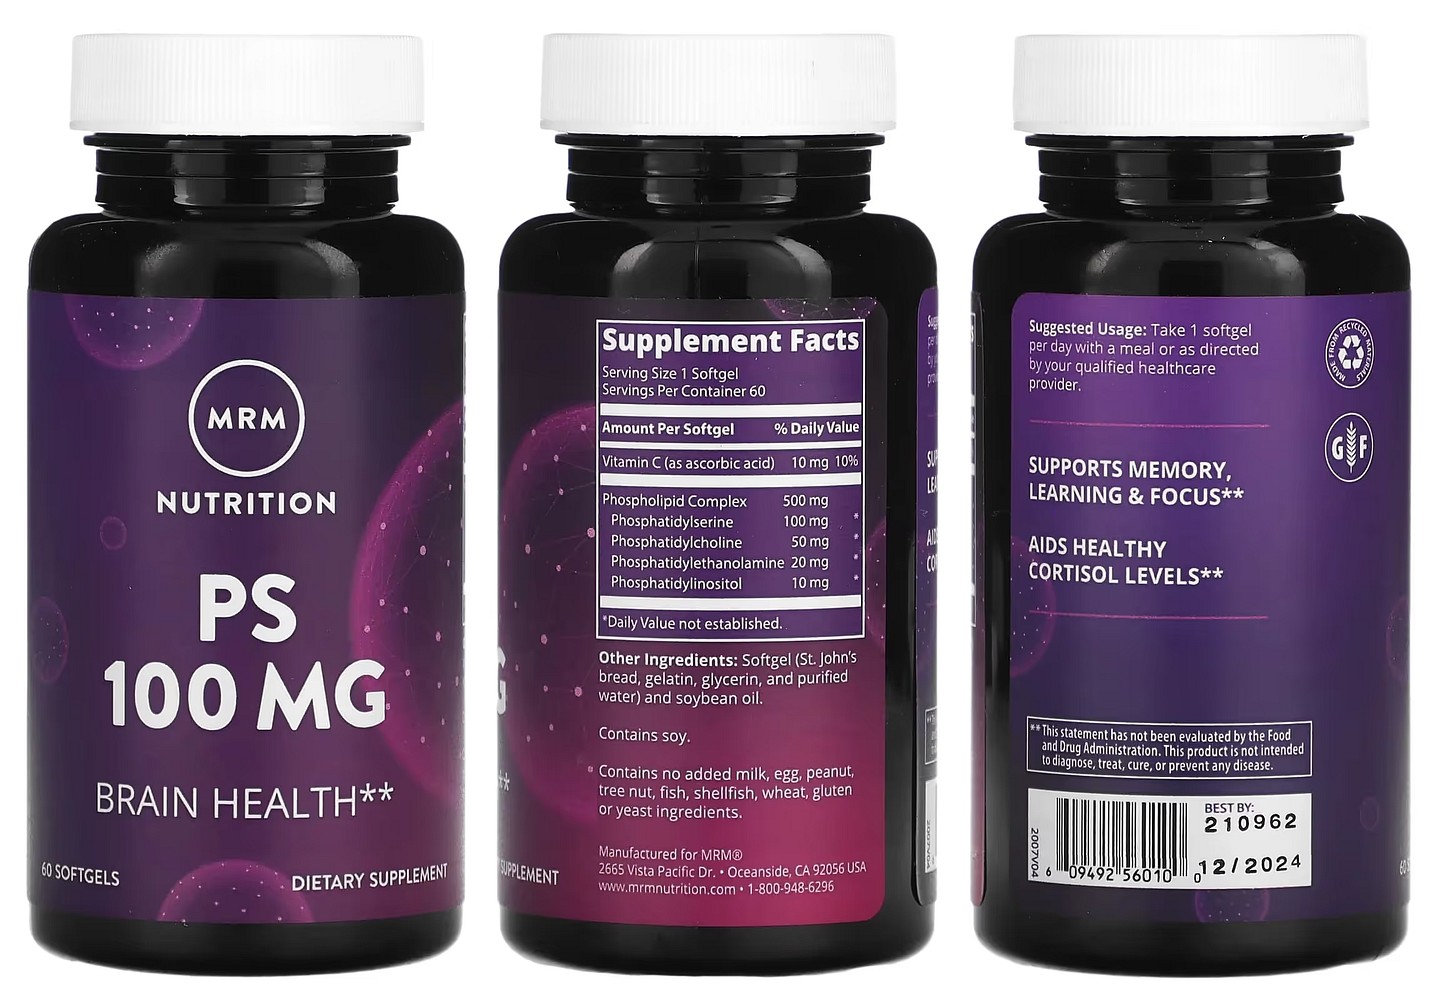 MRM Nutrition, PS packaging